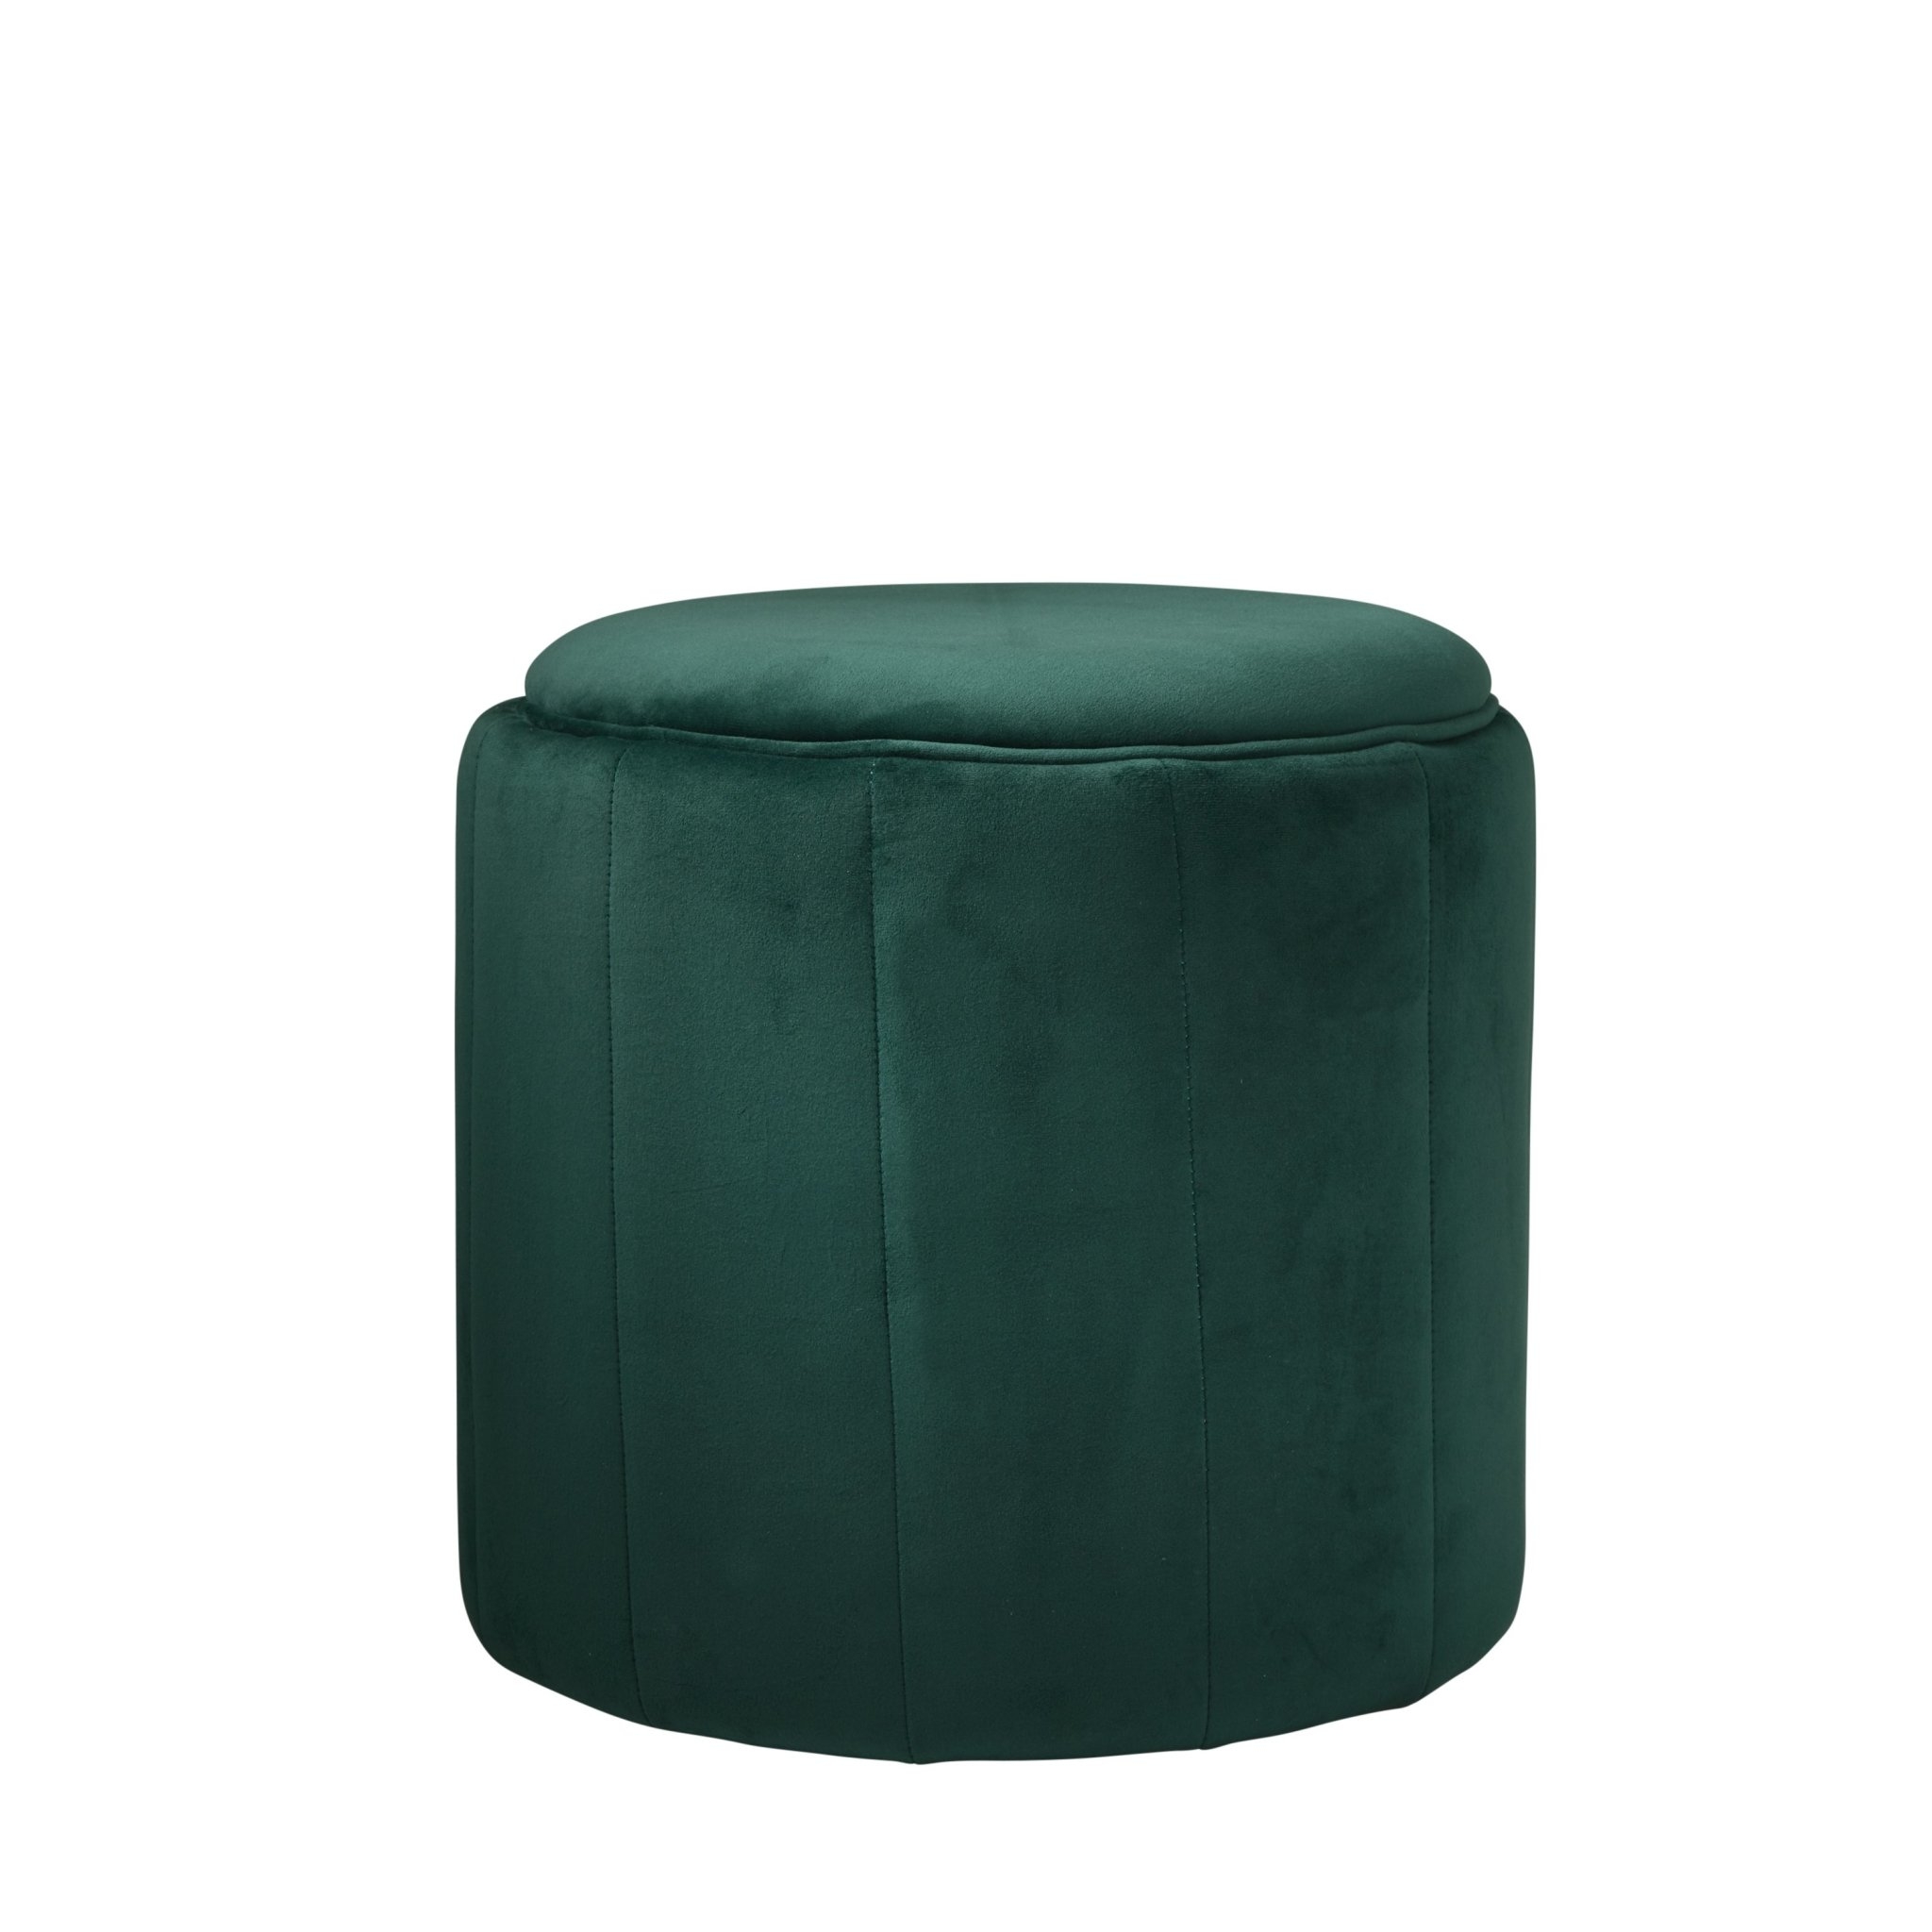 Native Home & Lifestyle Round Stool in Green Velvet 43 x 43 x 42cm – Furniture & Homeware – The Luxe Home